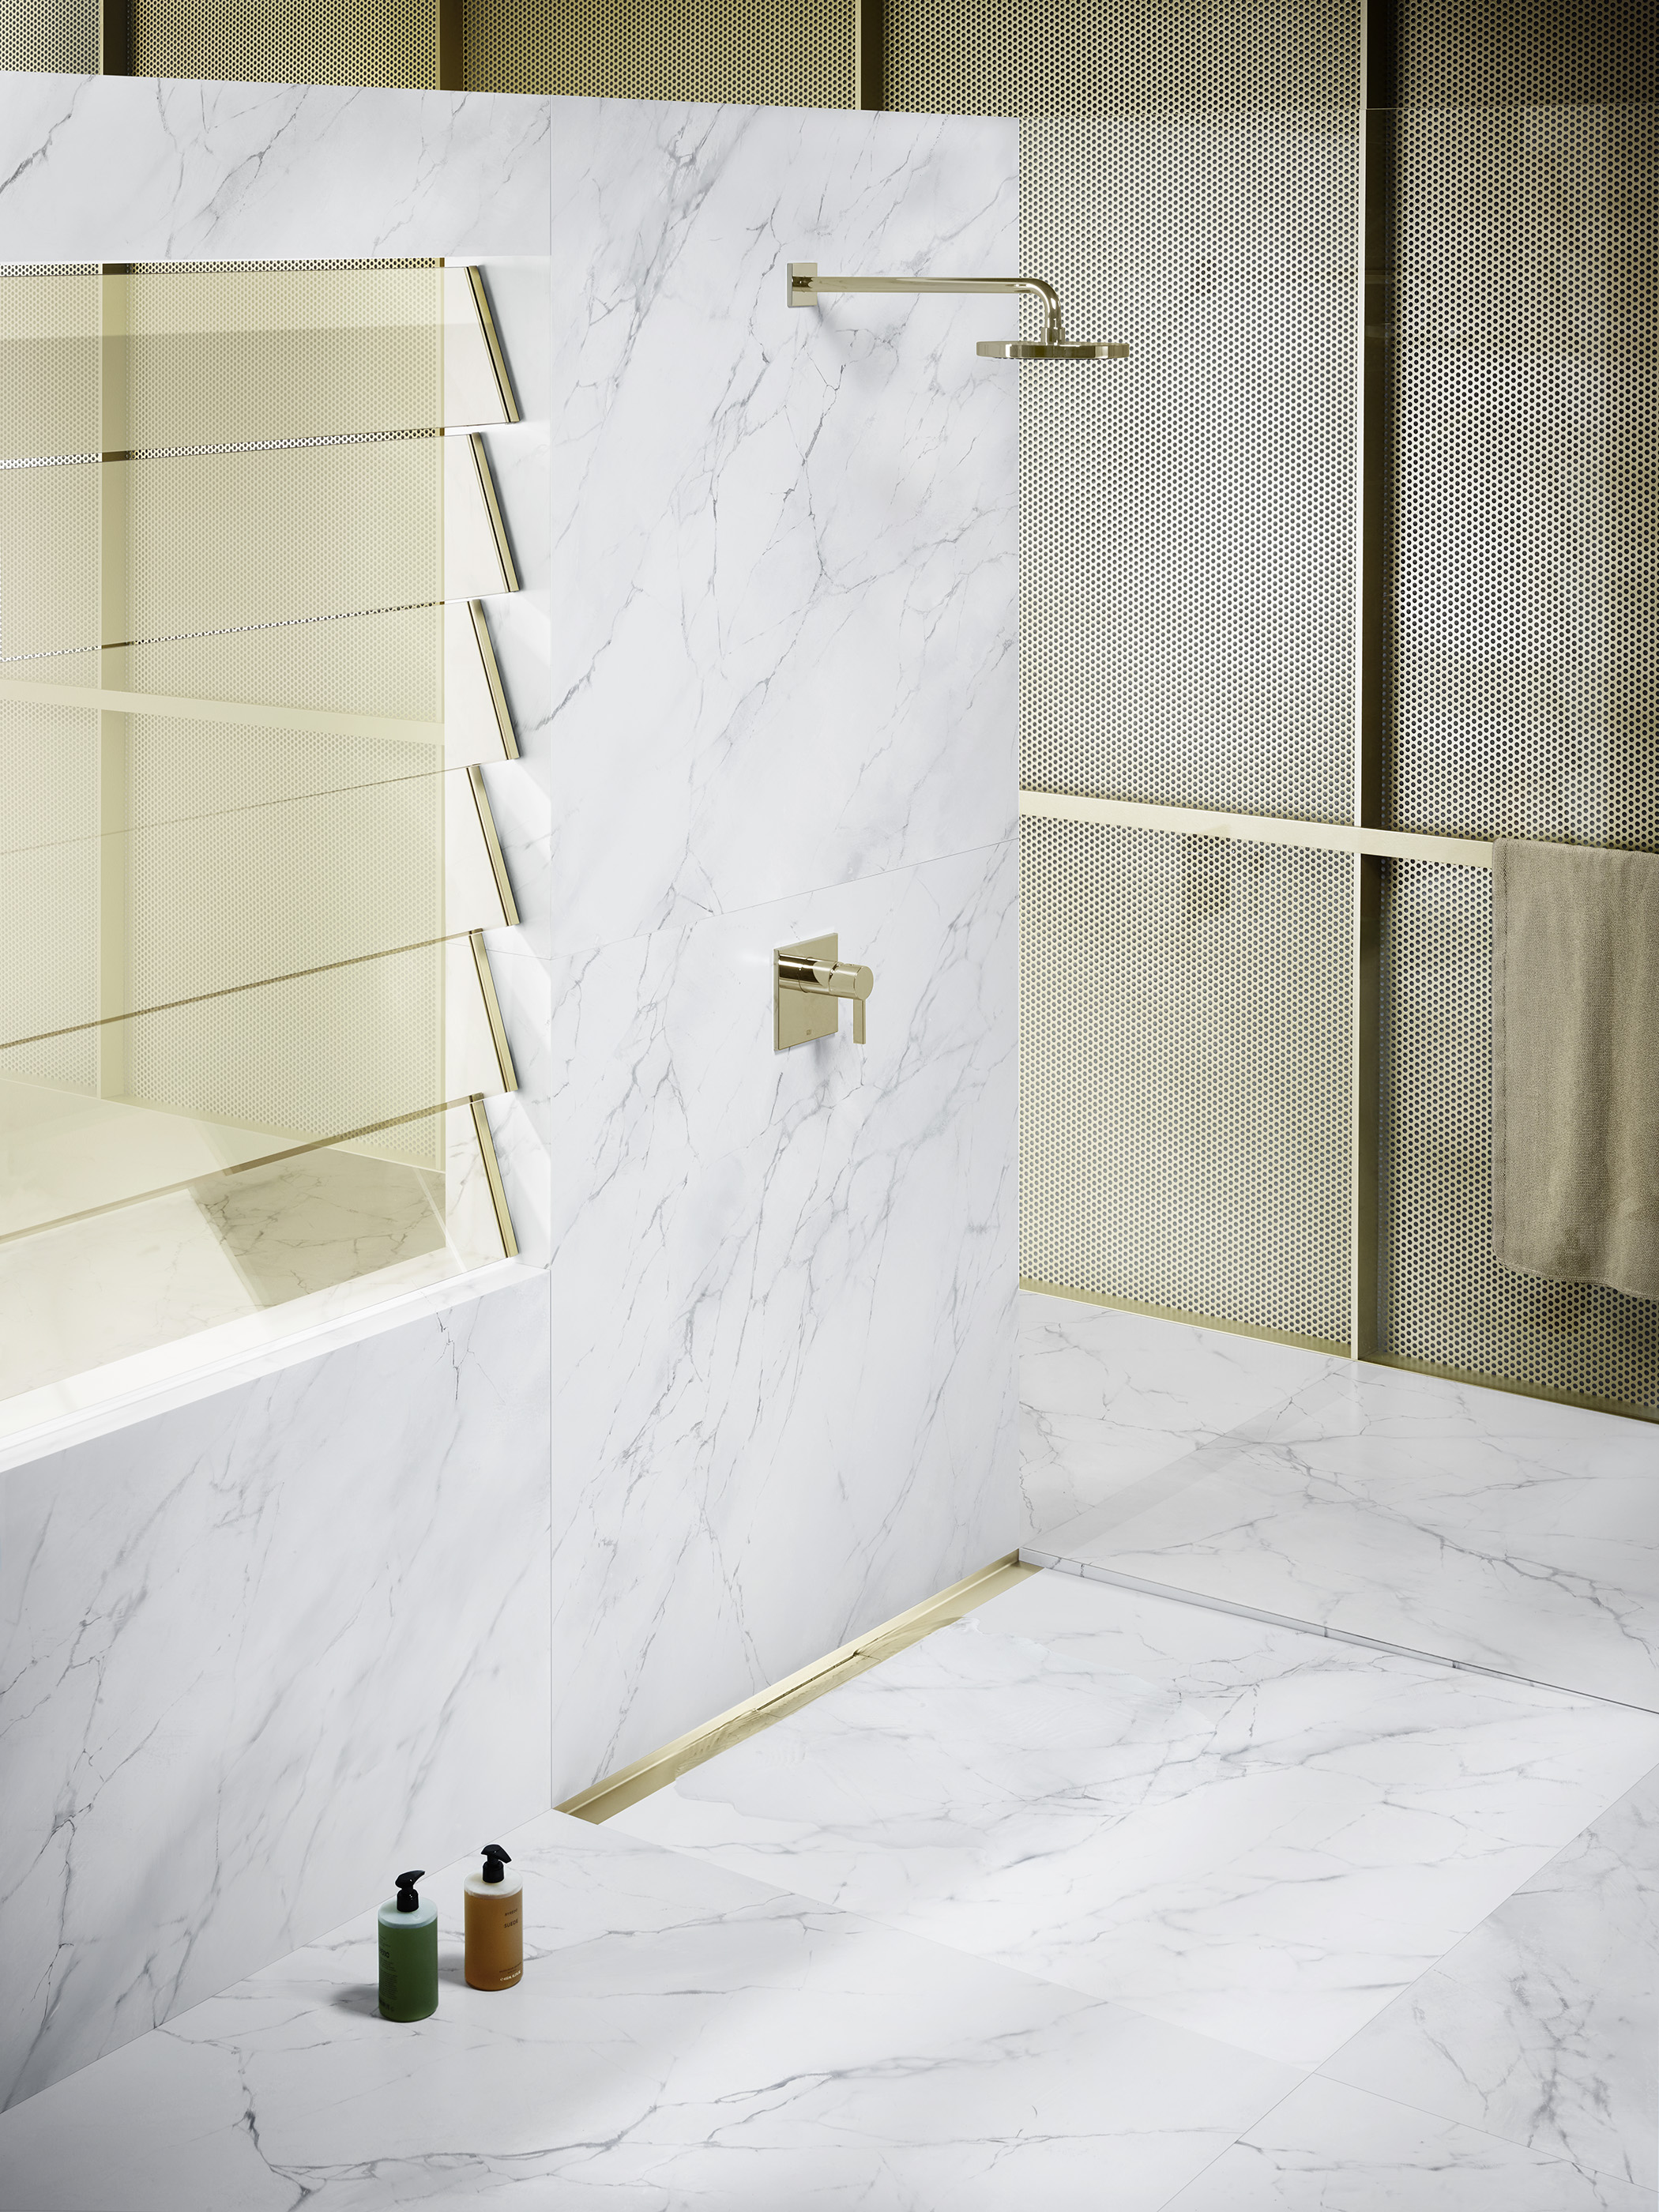 No fewer than ten shower channels can be combined with the DallFlex system. For example, the shower channel CeraWall Select in brass, matt.  Photo: Dallmer GmbH + Co. KG